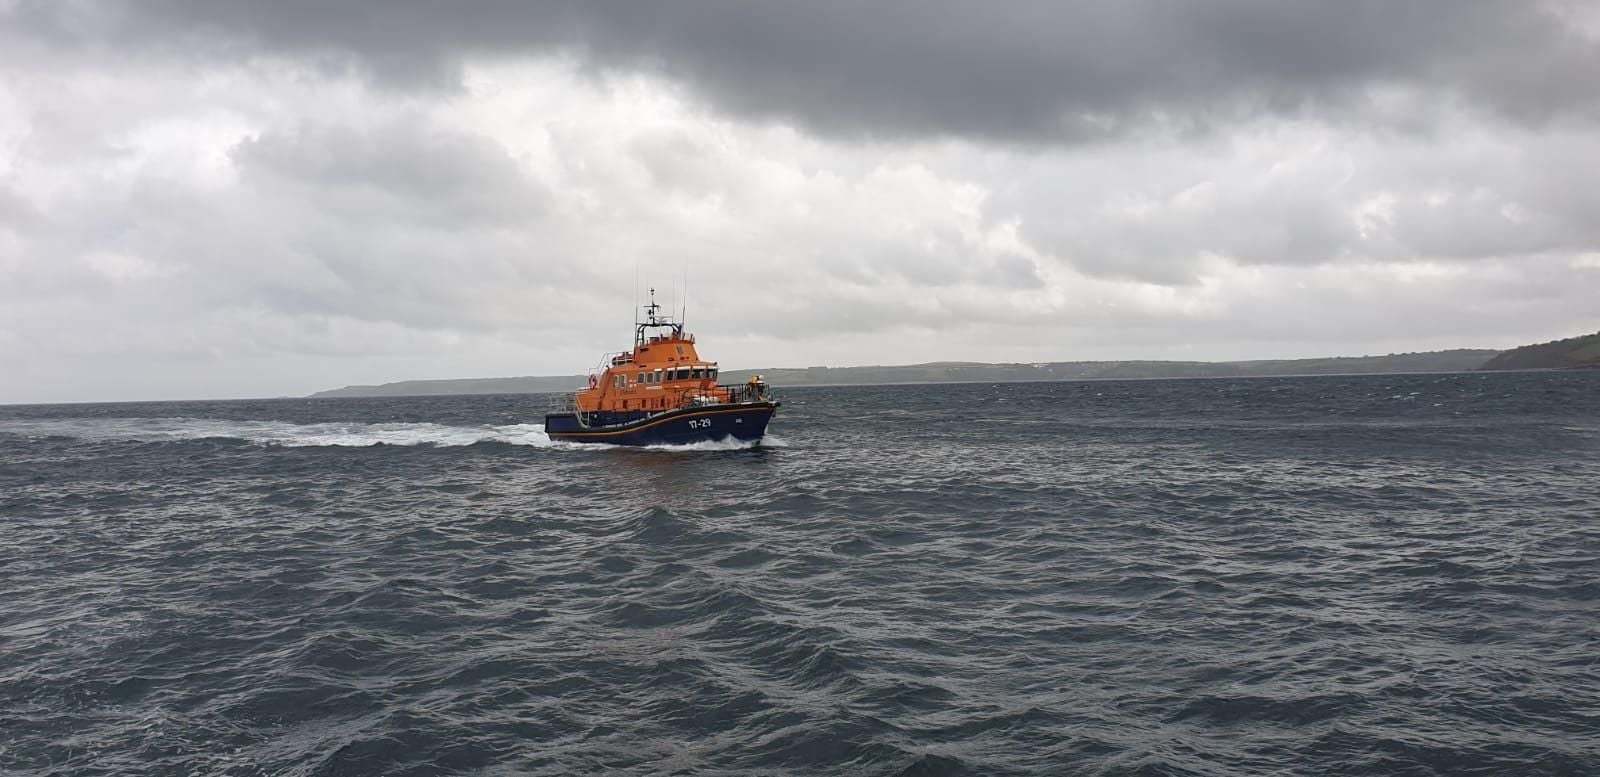 The lifeboat was launched to help an injured crew member